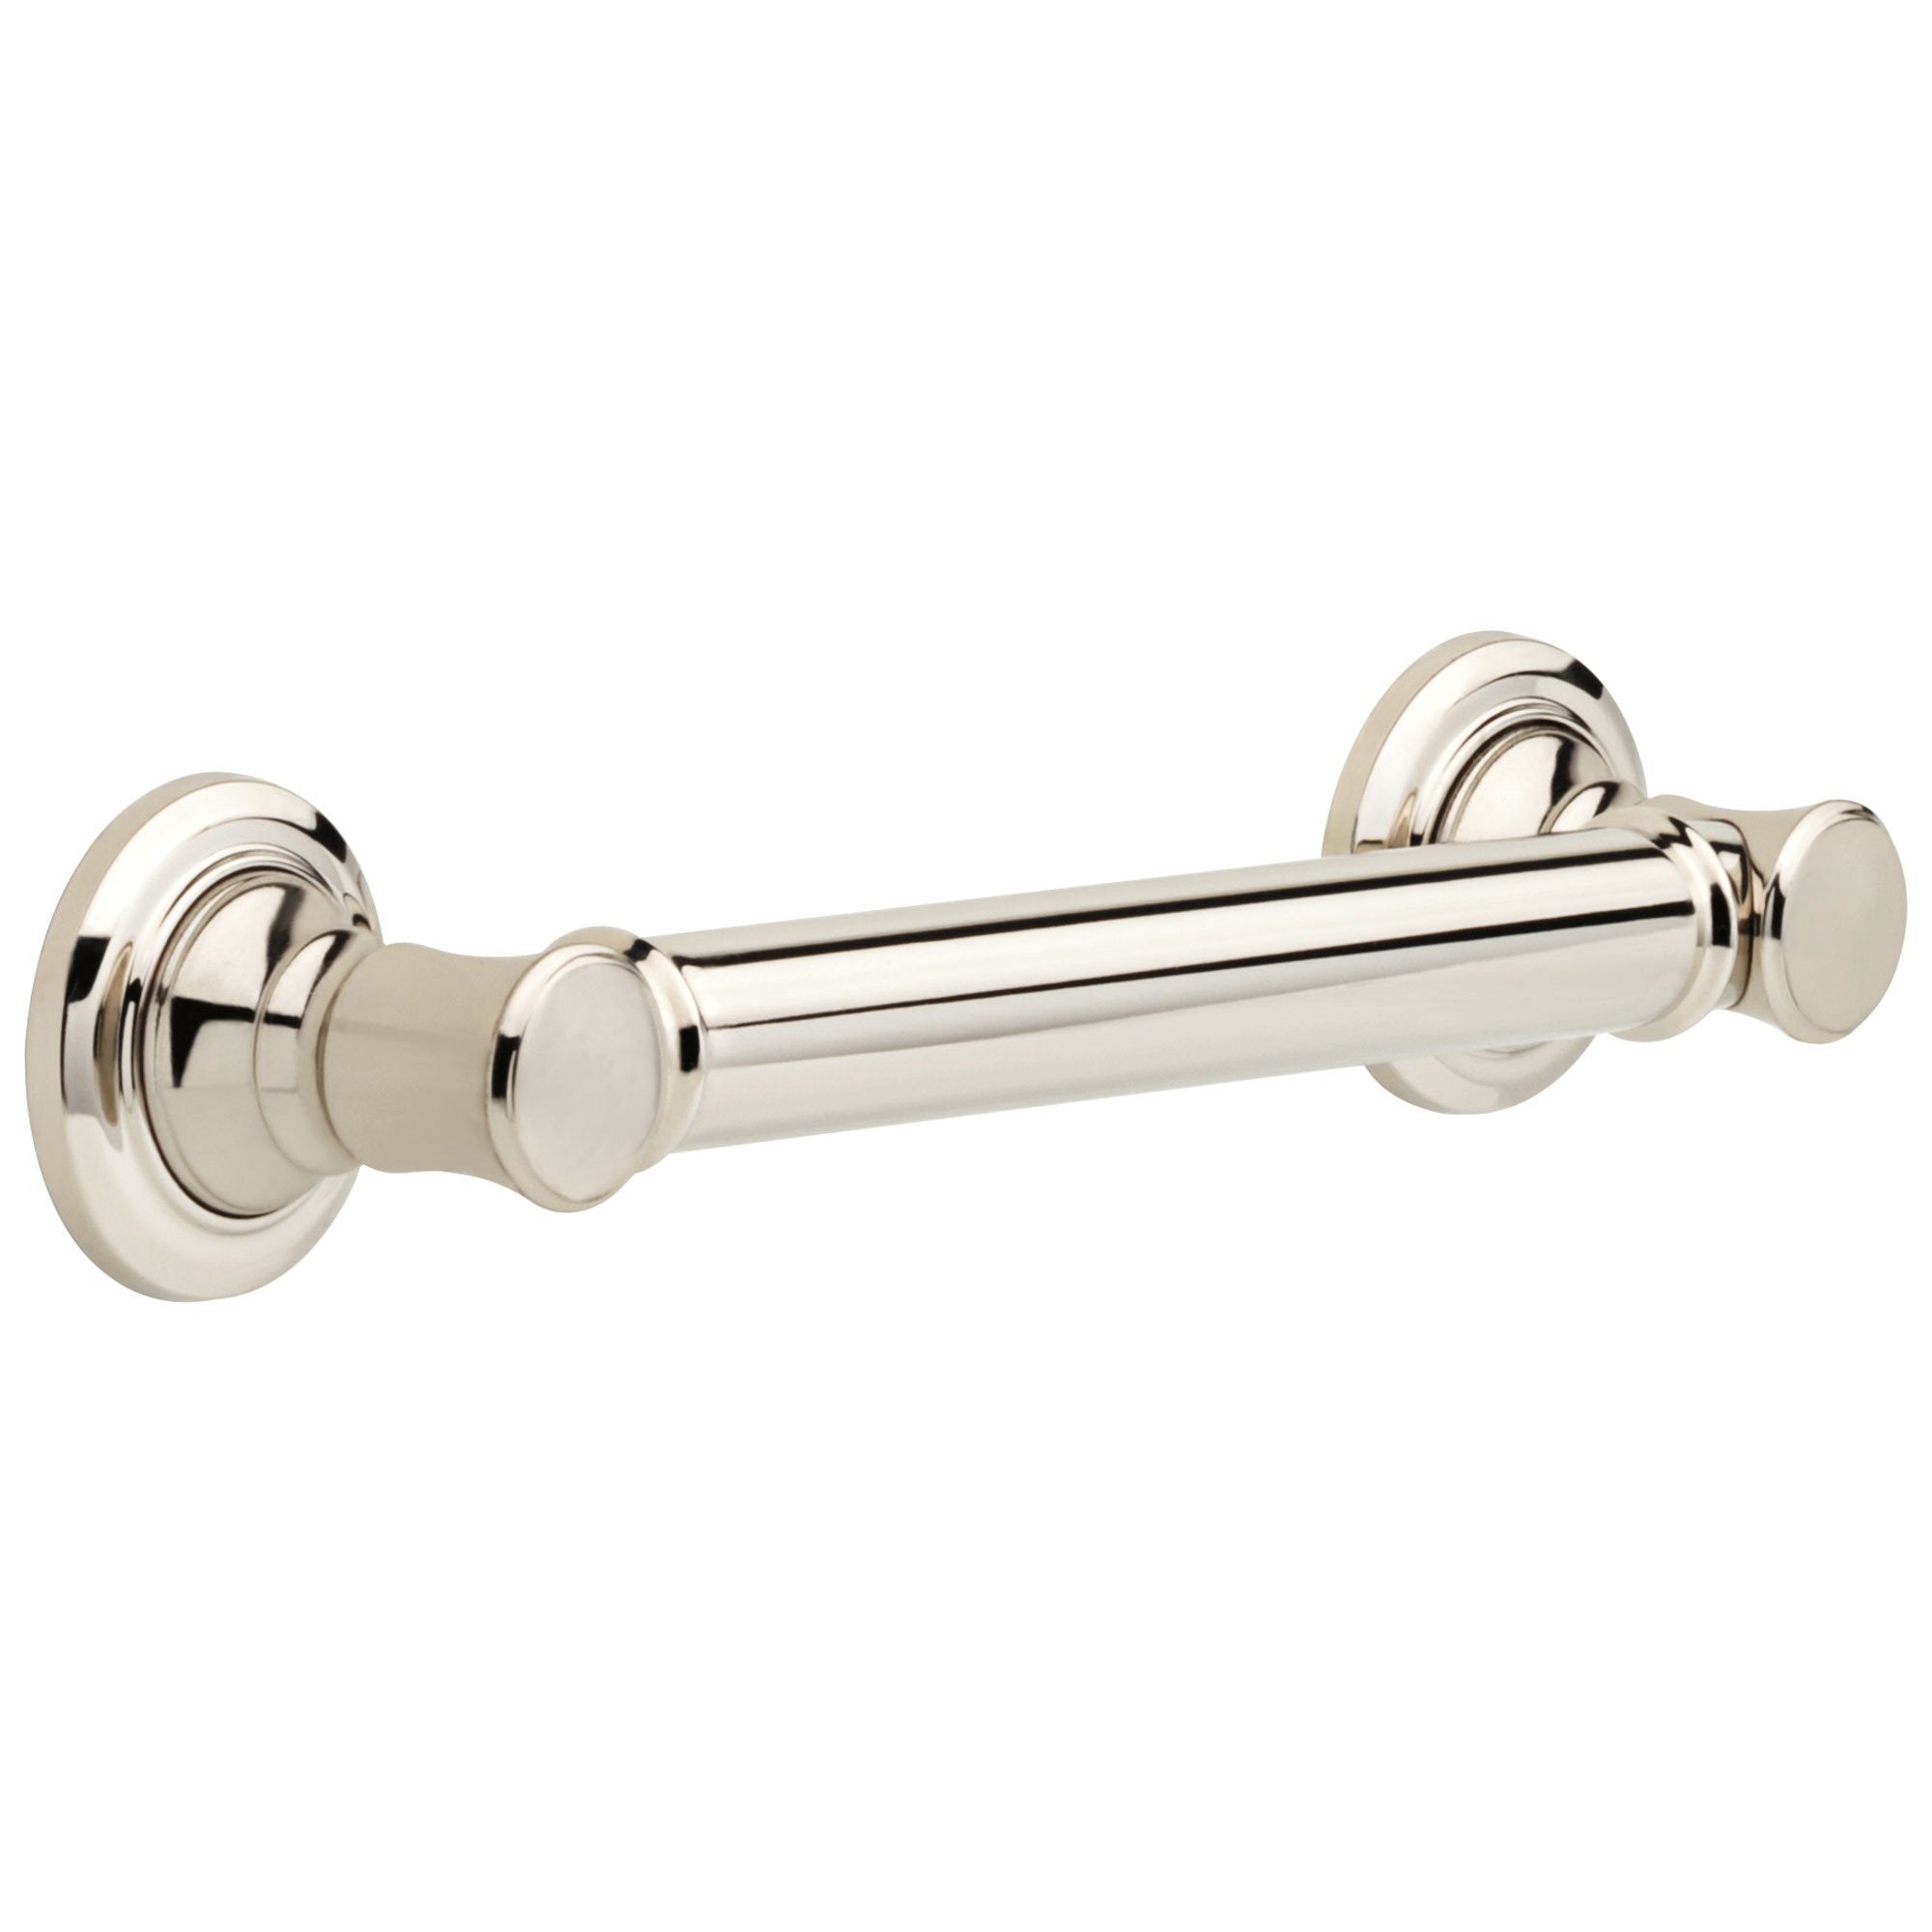 Delta Bath Safety Collection Polished Nickel Finish Traditional Decorative ADA Approved Short 12" Grab Bar Handle for Bathroom or Shower D41612PN